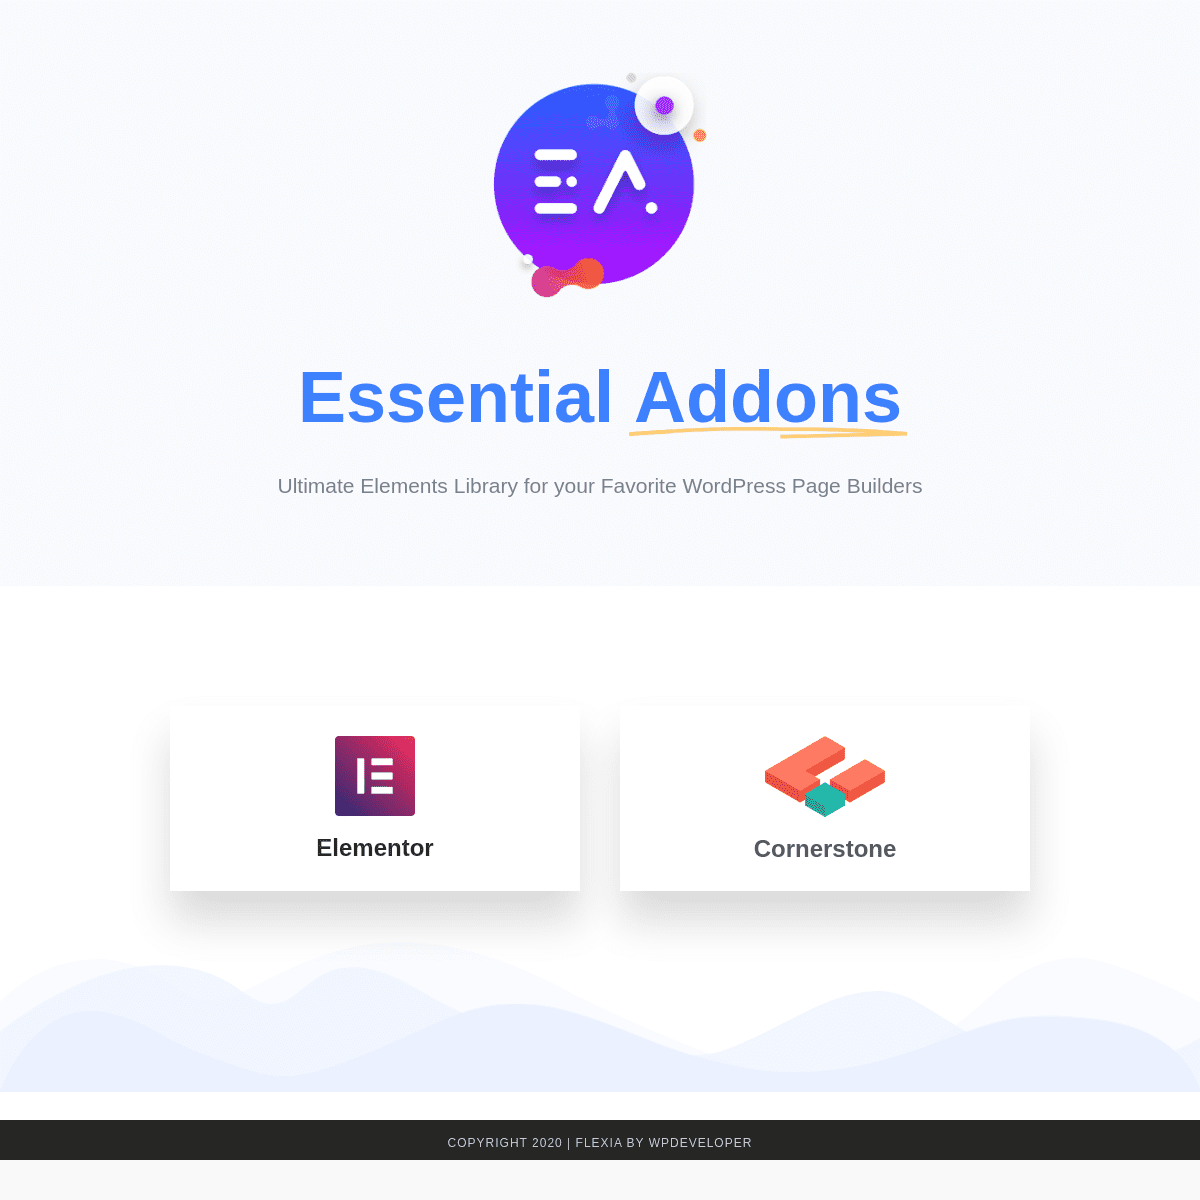 A complete backup of https://essential-addons.com